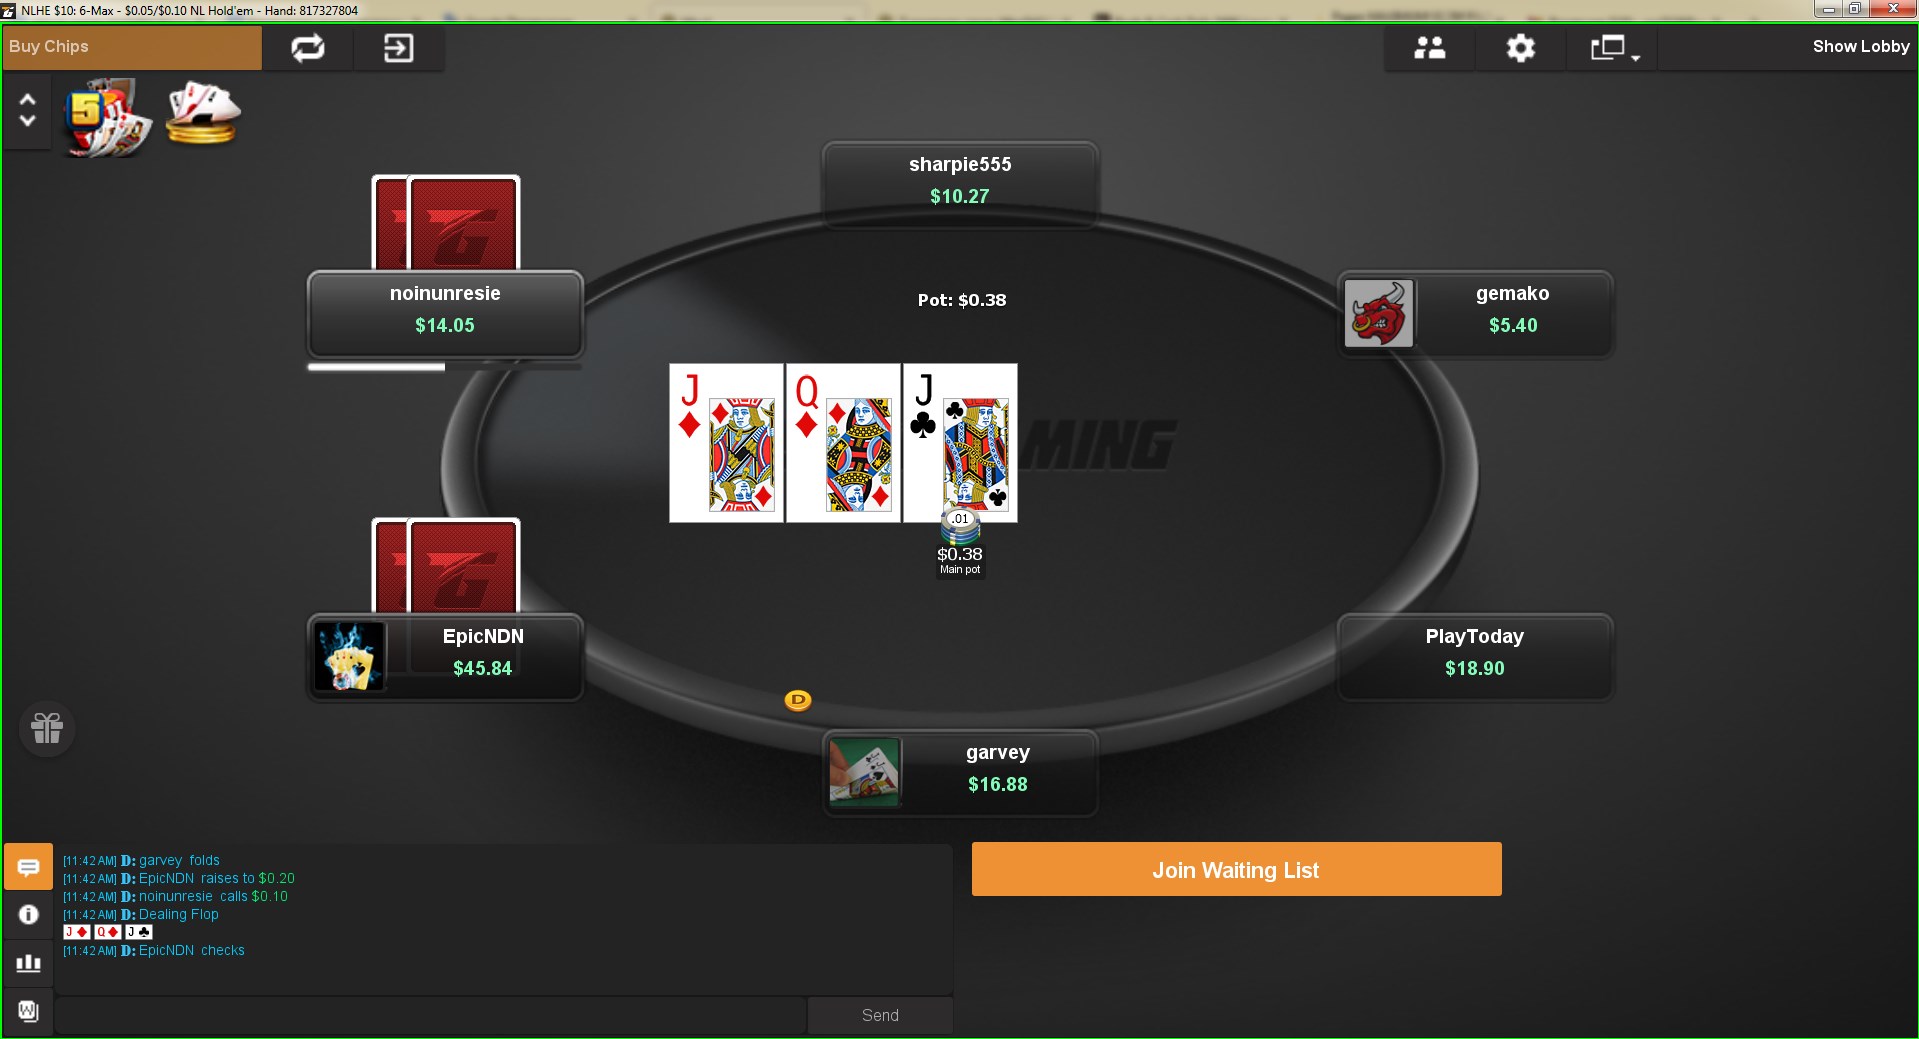 Boost poker at Tigergaming is played only on NL2. 